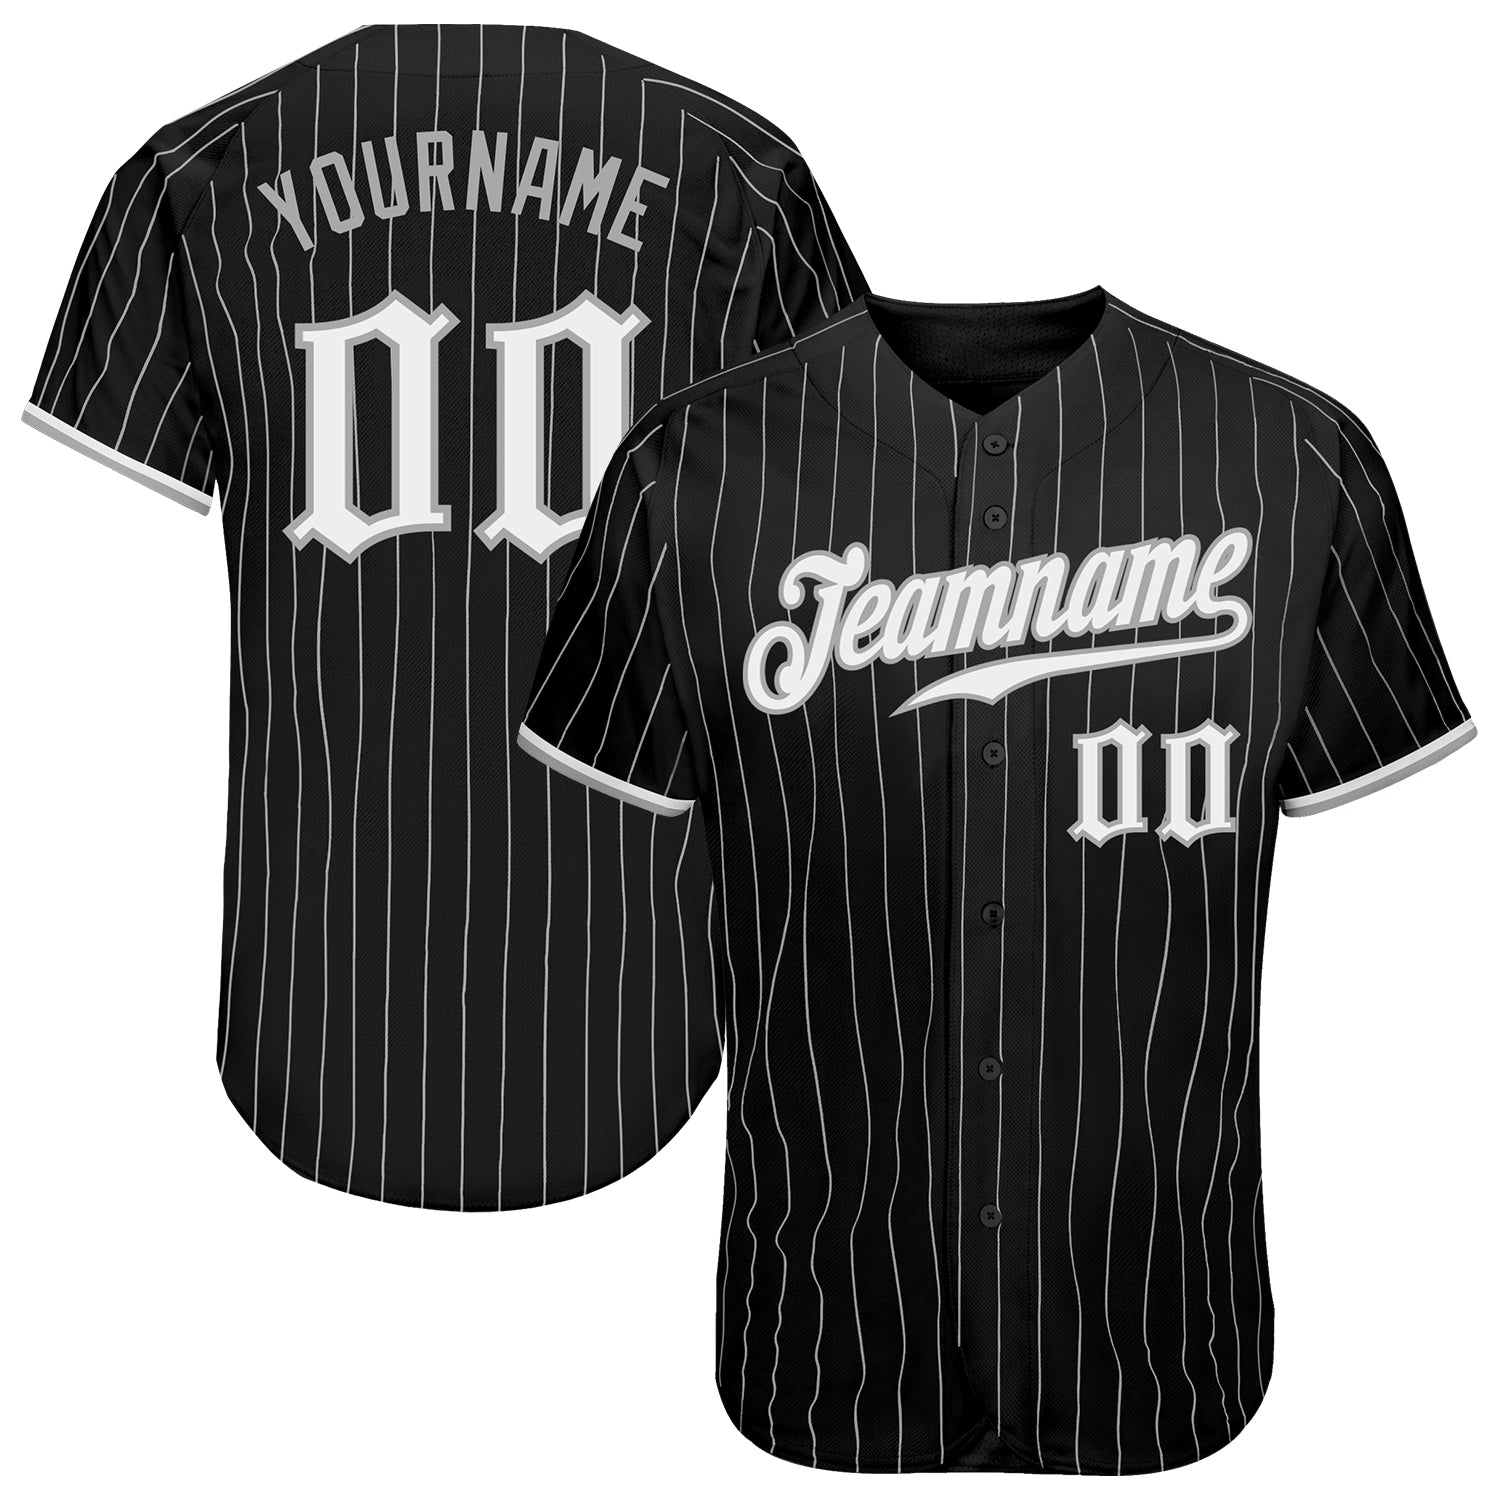 Customized Yankees Jersey, Personalized Yankees jersey for sale